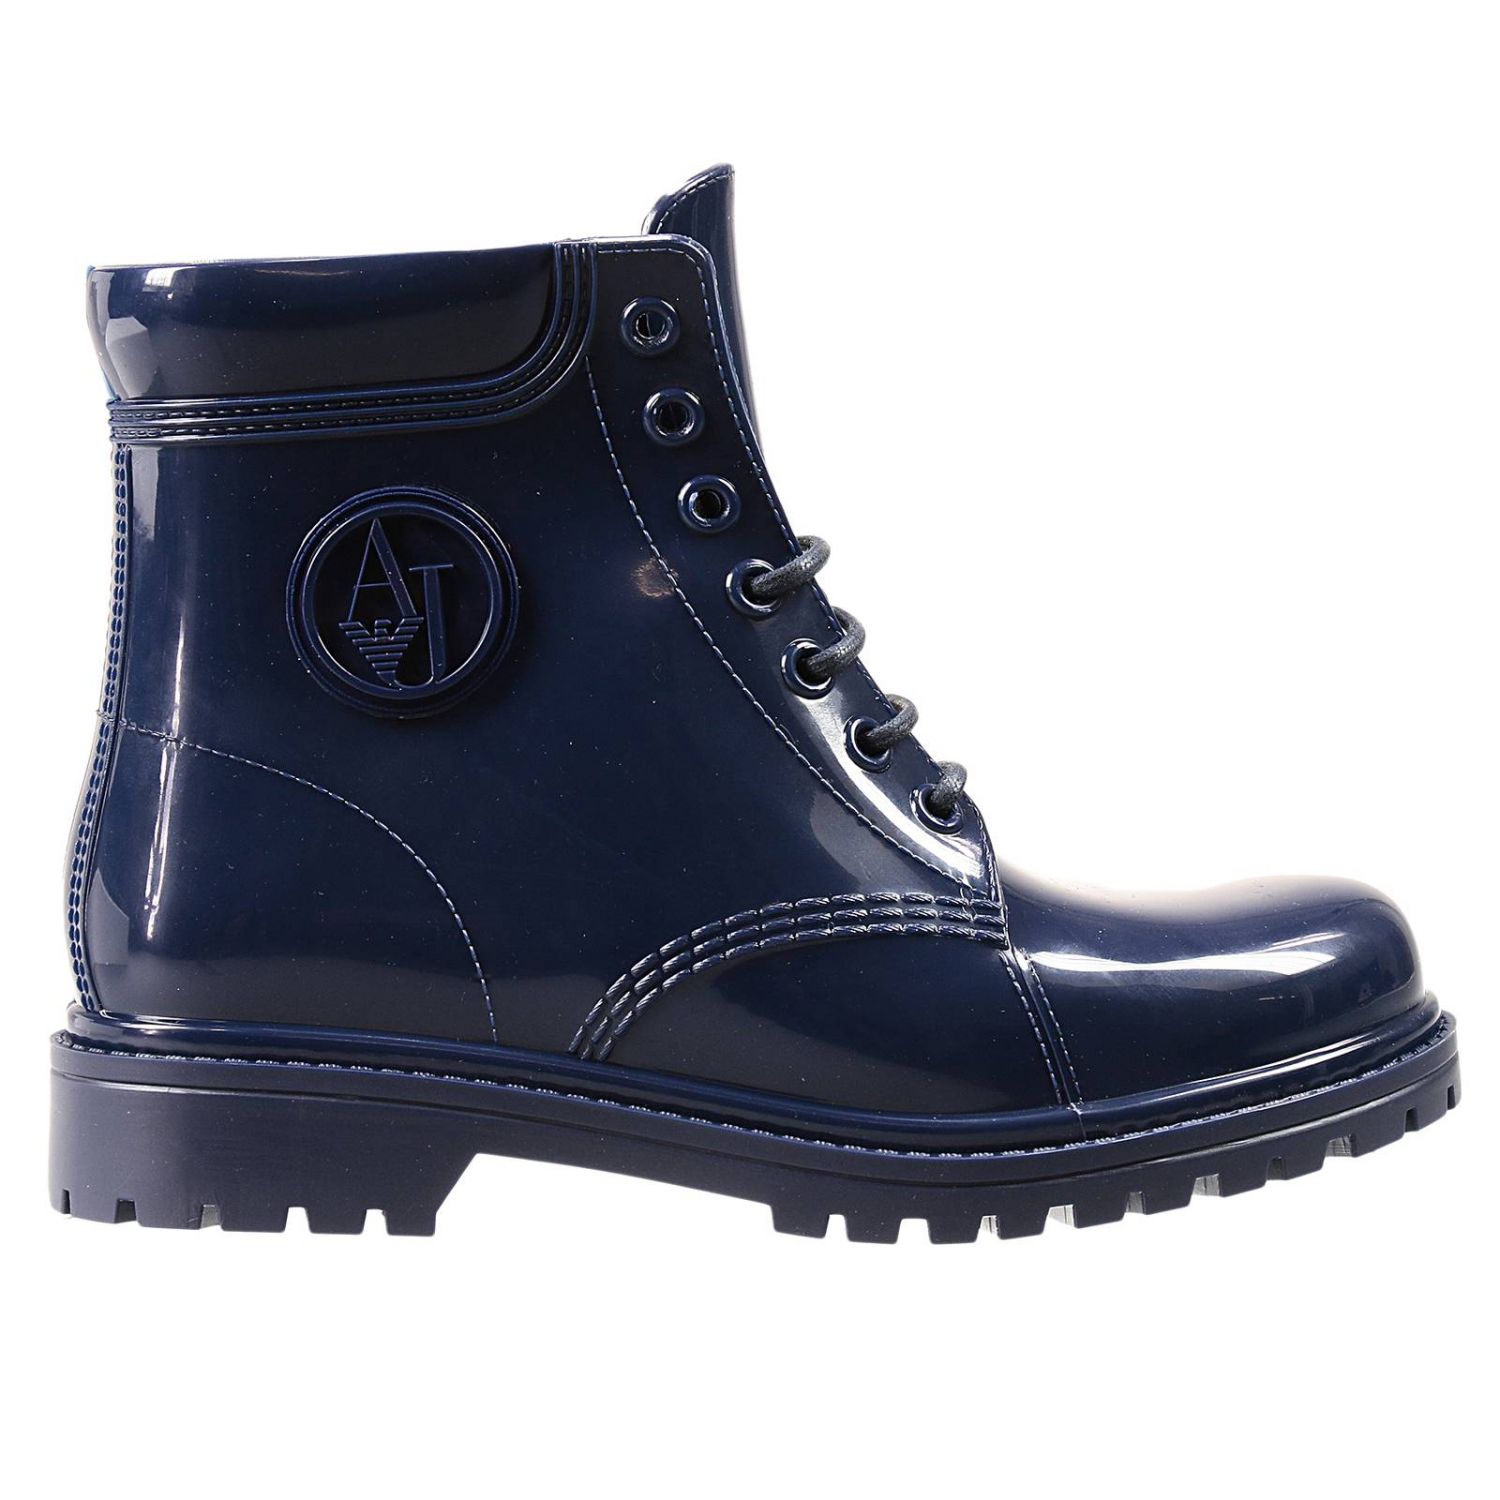 Boots Armani Jeans b55k4 49 Giglio UK